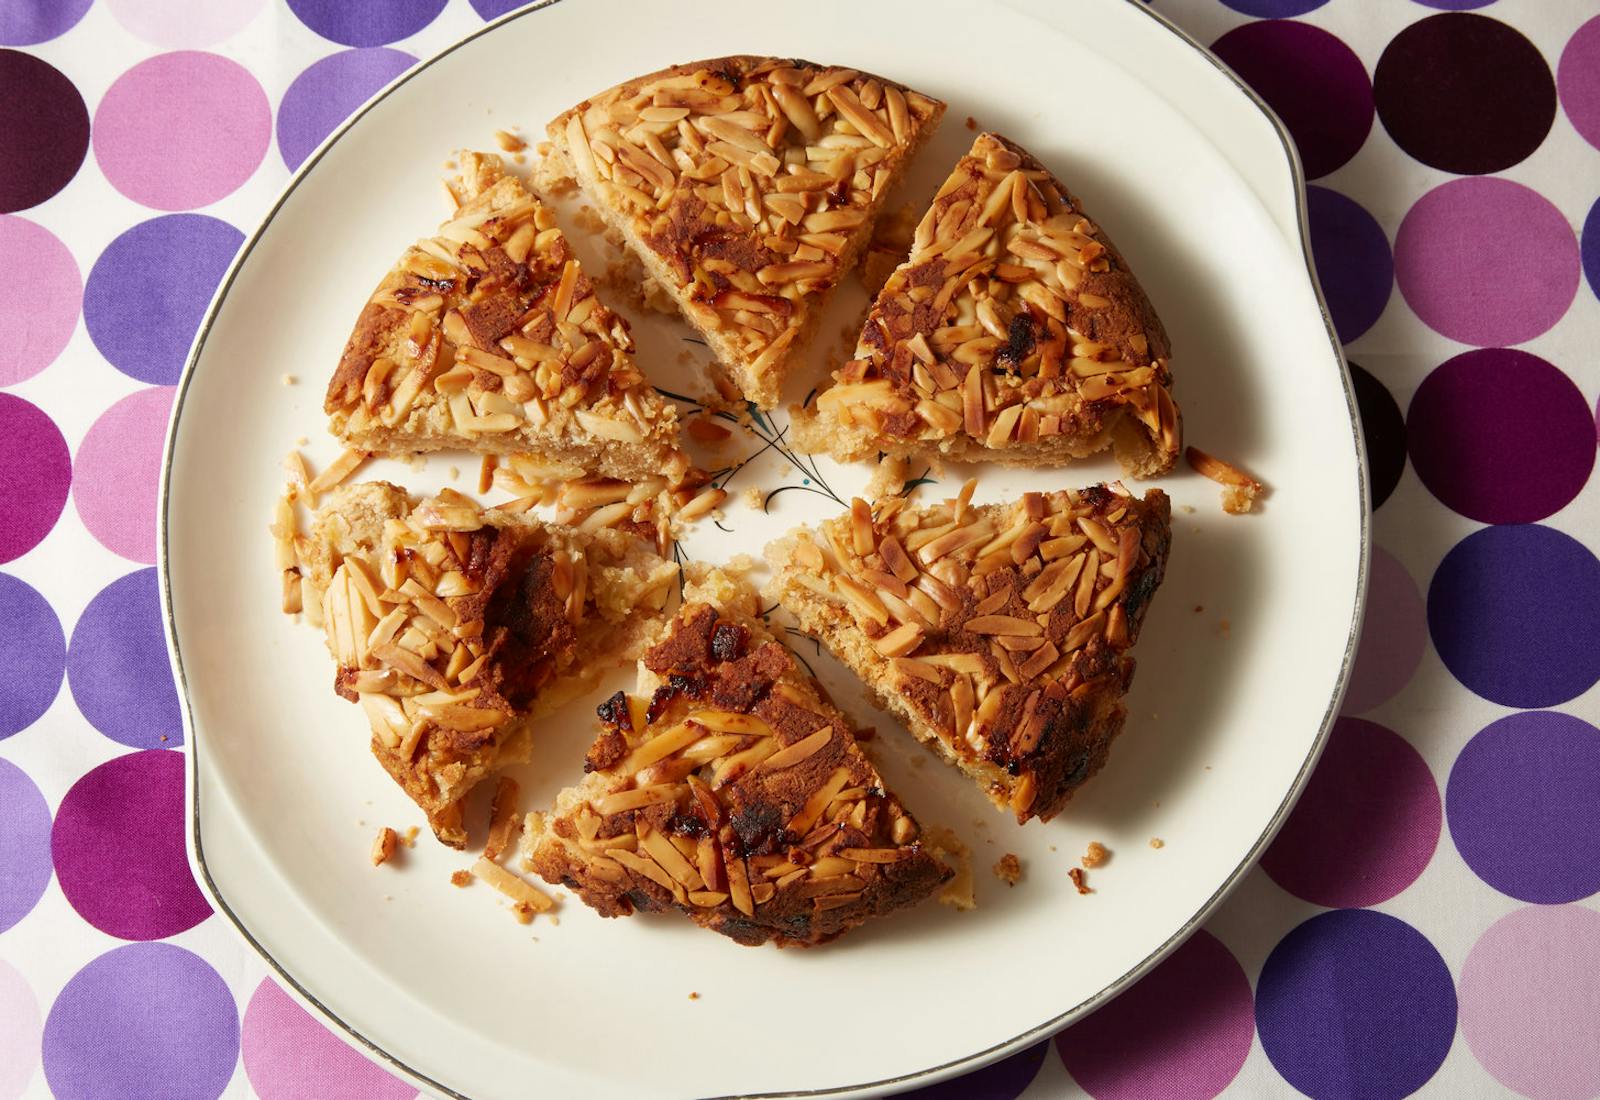 Apple and almond kugel sliced into portions on white plate atop purple-patterned tablecloth.